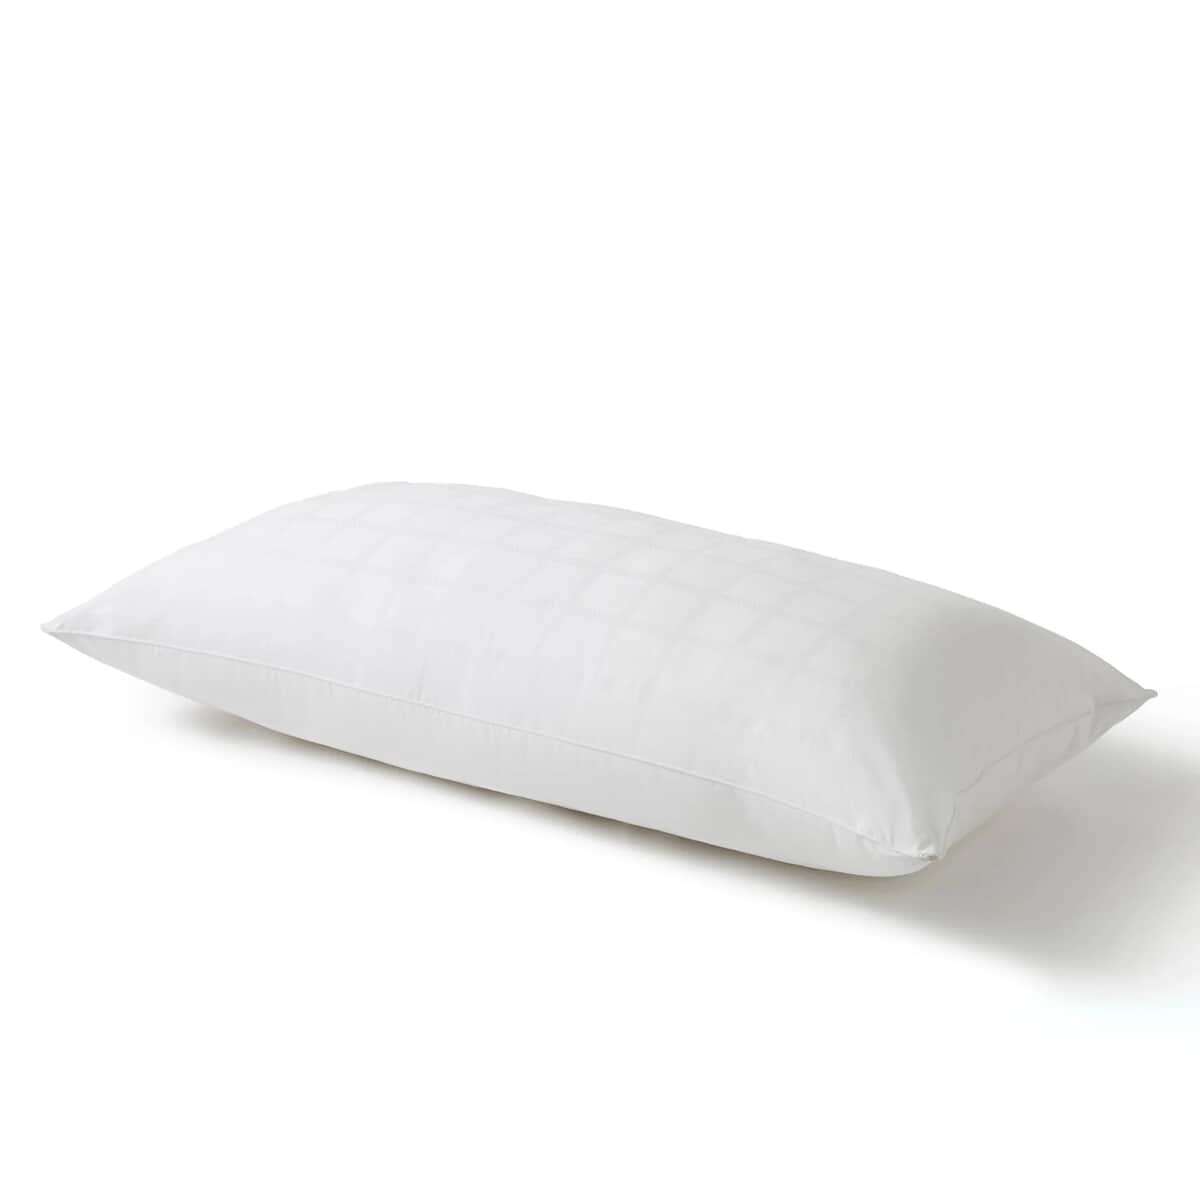 Fine Bedding Co The Ultimate King Pillow large